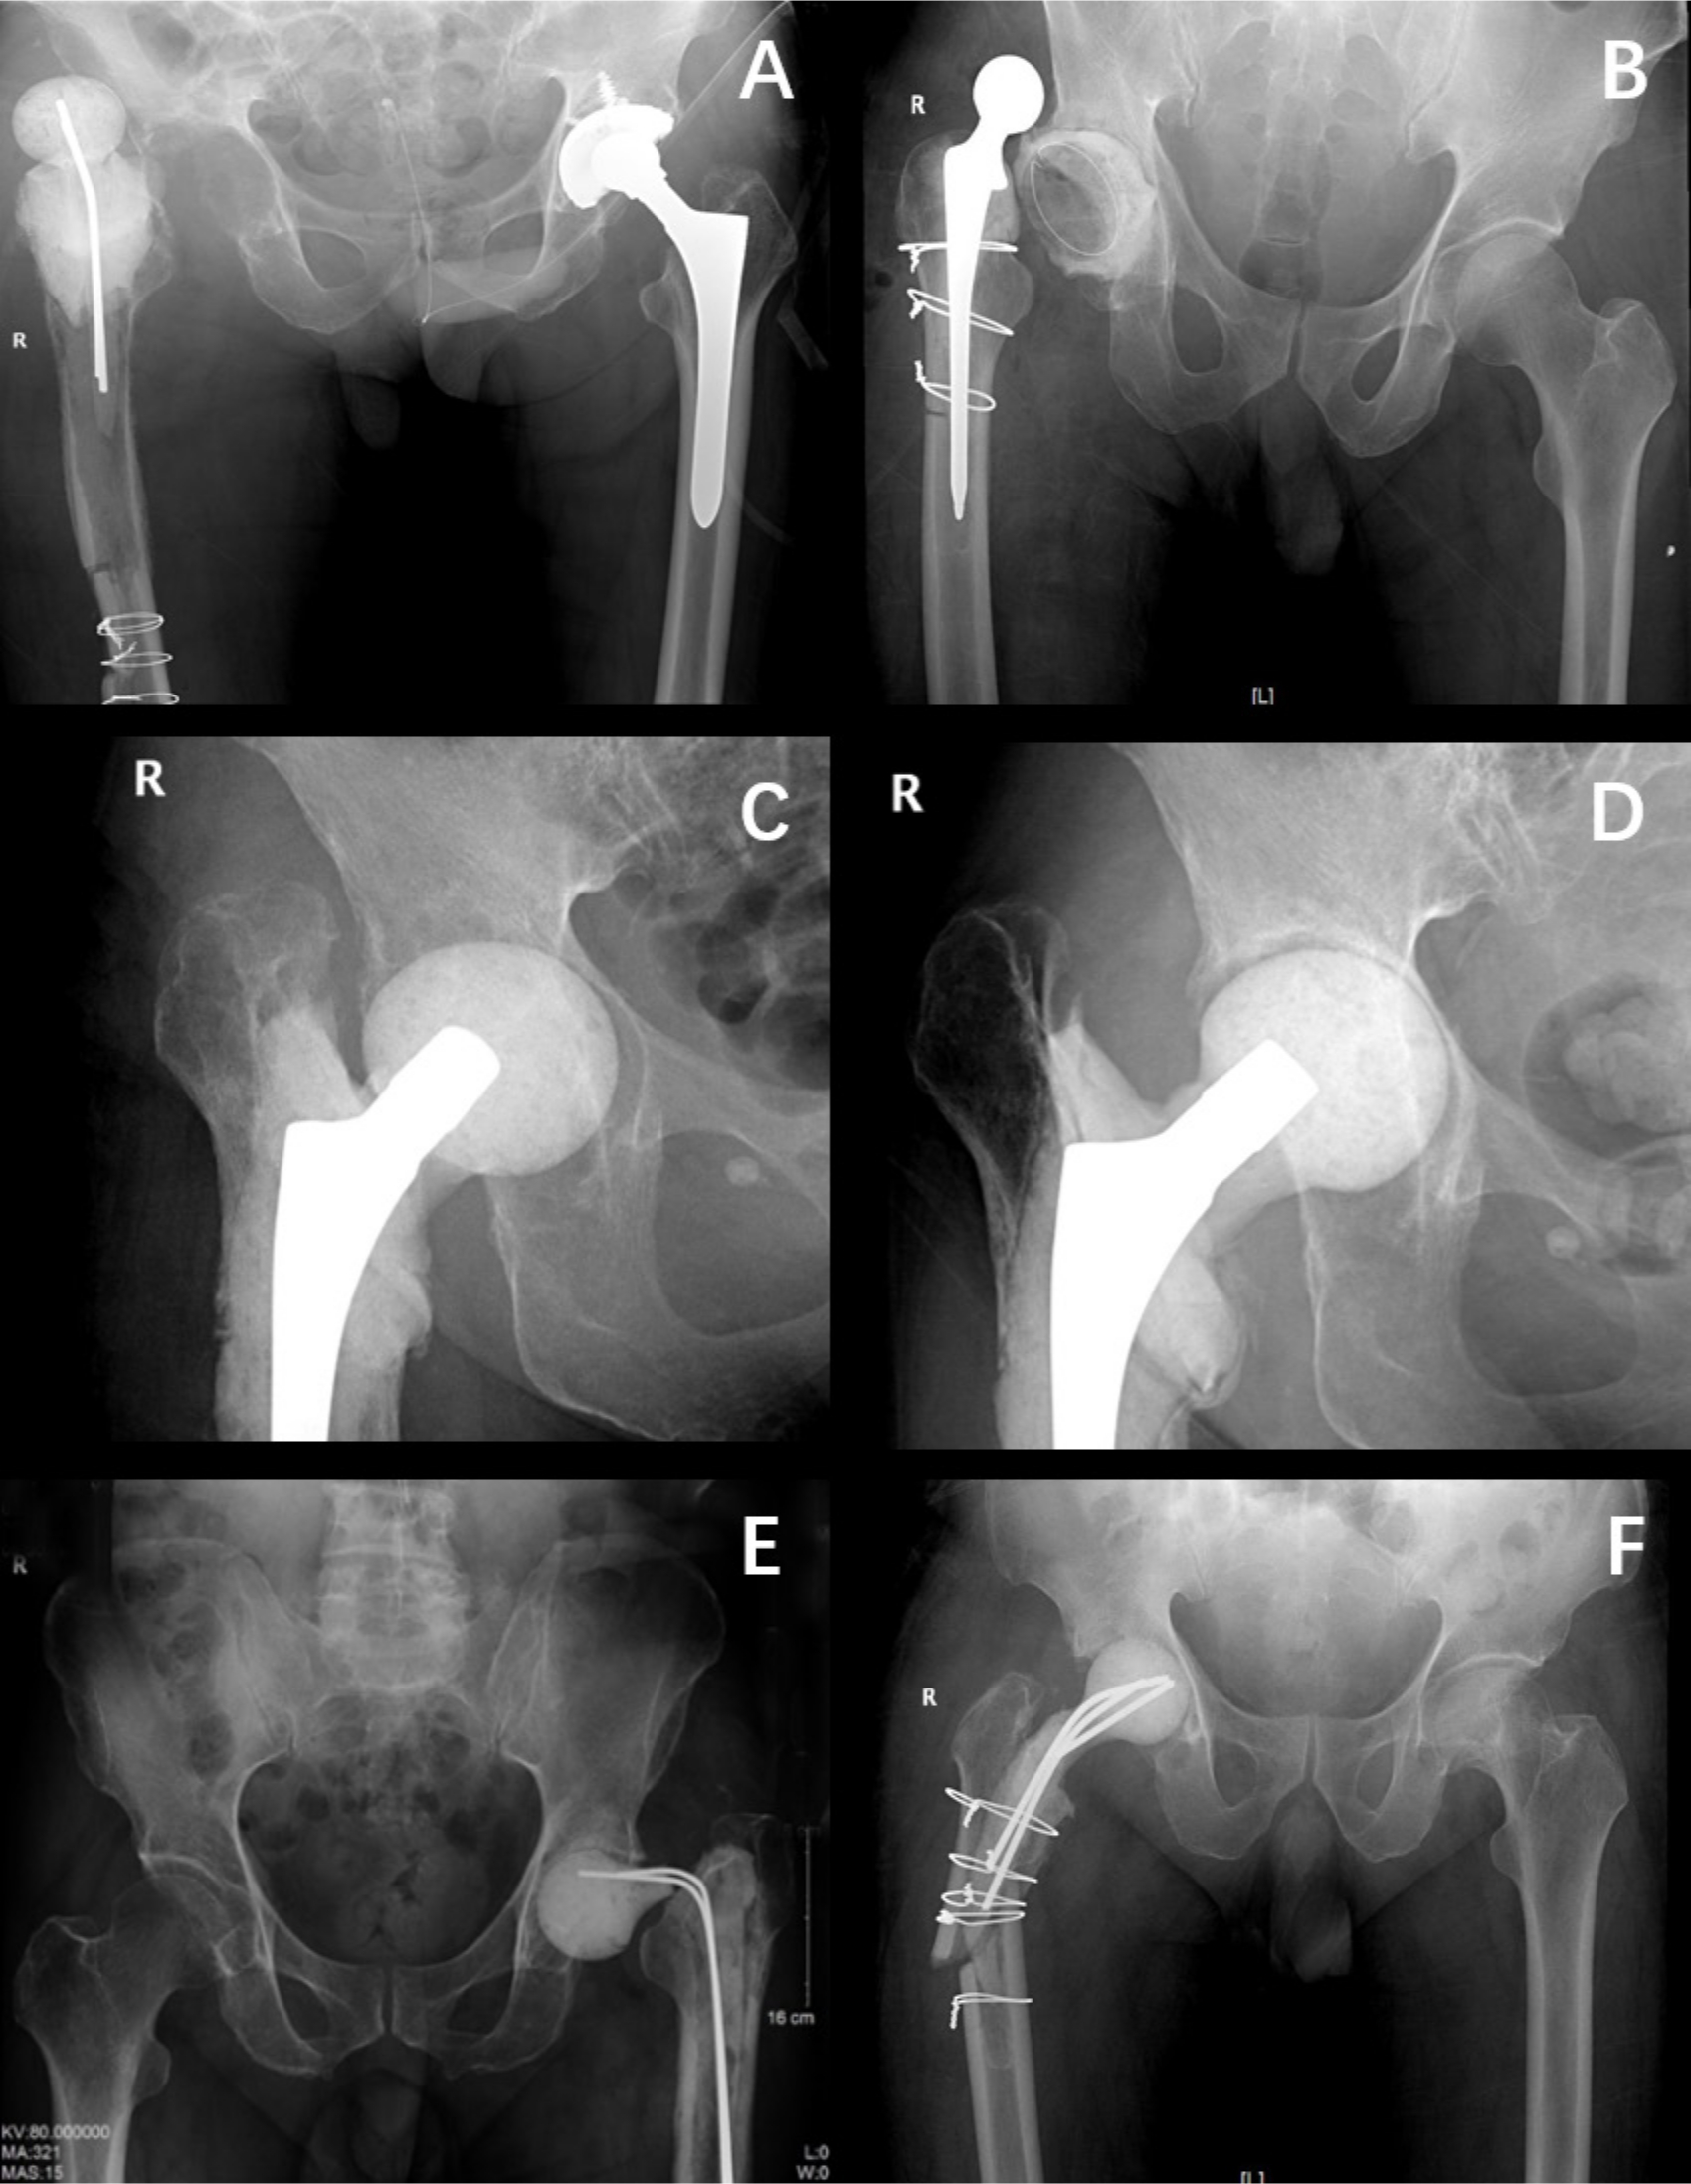 Fig. 3 
            Spacer-related mechanical complications. a) Dislocation of a spacer using Kirschner-wires (K-wires) as endoskeleton in group I. b) Dislocation of a spacer using cemented prosthesis as spacer in group III. c) and d) Acetabular bone wear of a spacer using a small prosthesis as endoskeleton in group II; a 58 mm cup and #7 femoral stem were used in second-stage surgery. e) Fracture of spacers using K-wires as endoskeleton in group I. f) Periarticular fracture of a spacer using K-wires as endoskeleton in group I.
          